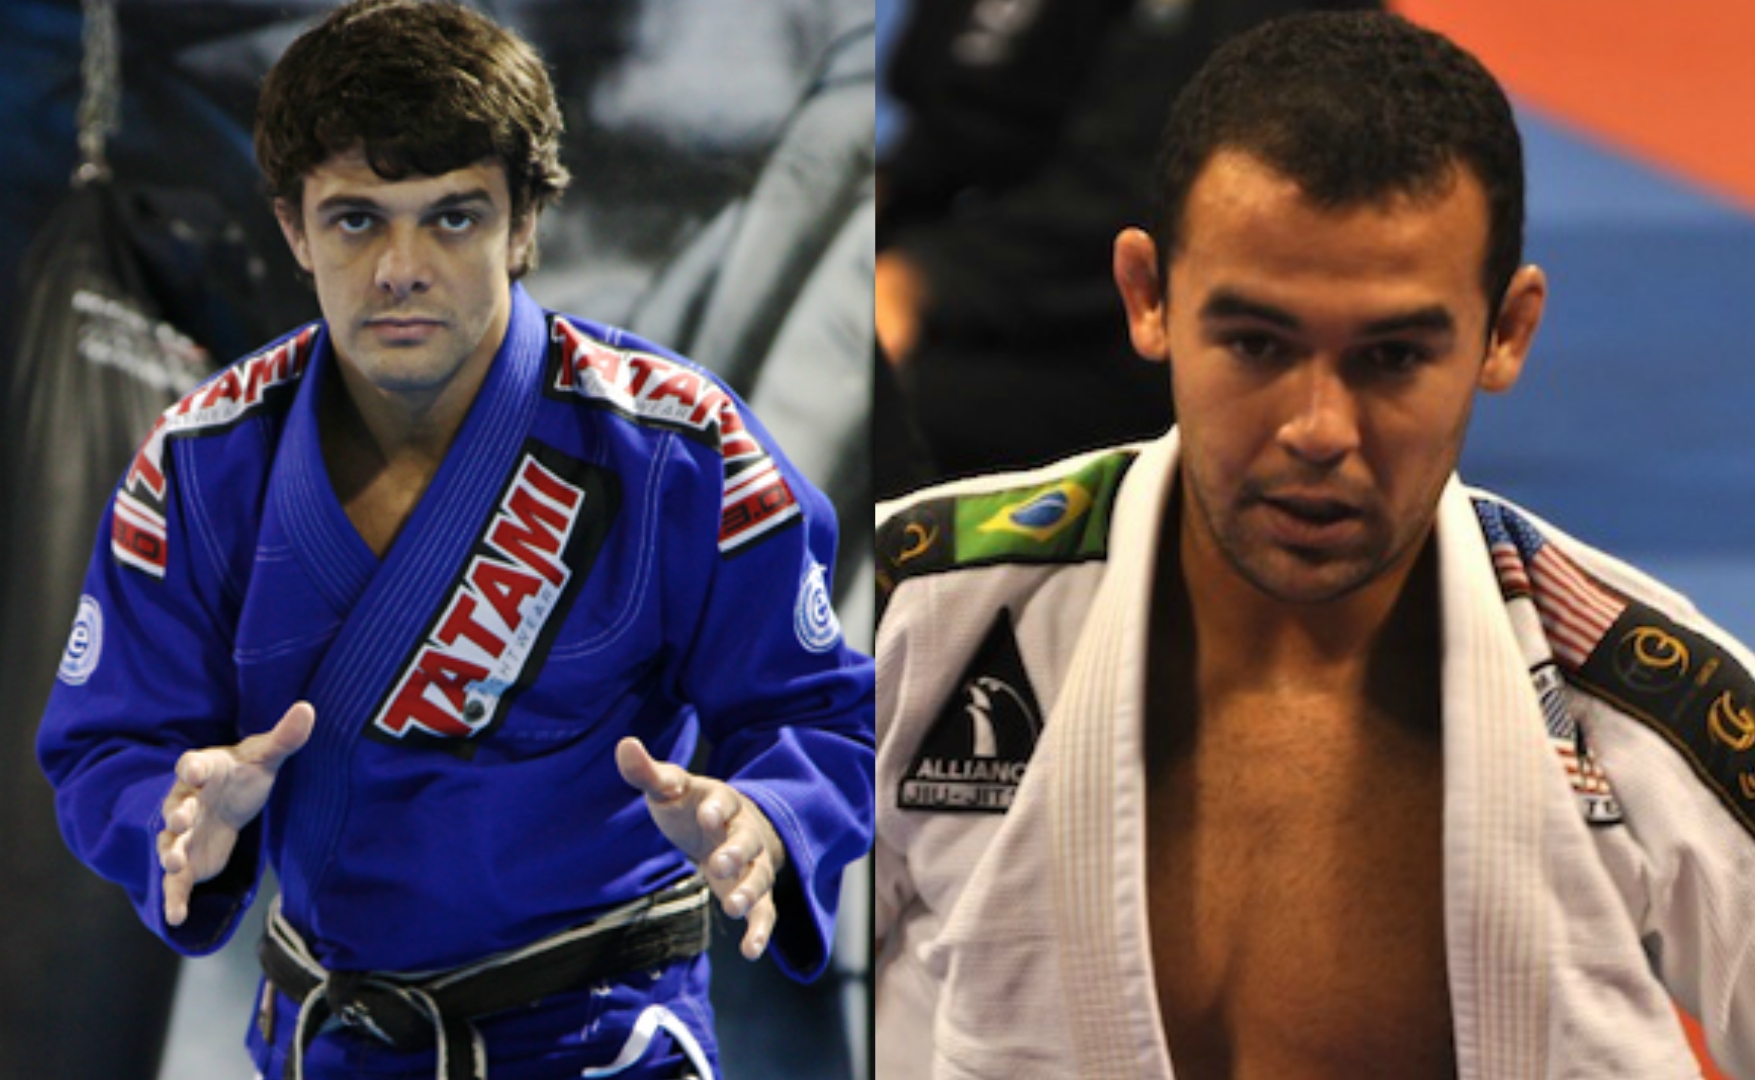 Advice from Legends: Robson Moura & Marcelo Garcia on How They Prepare for a Competition